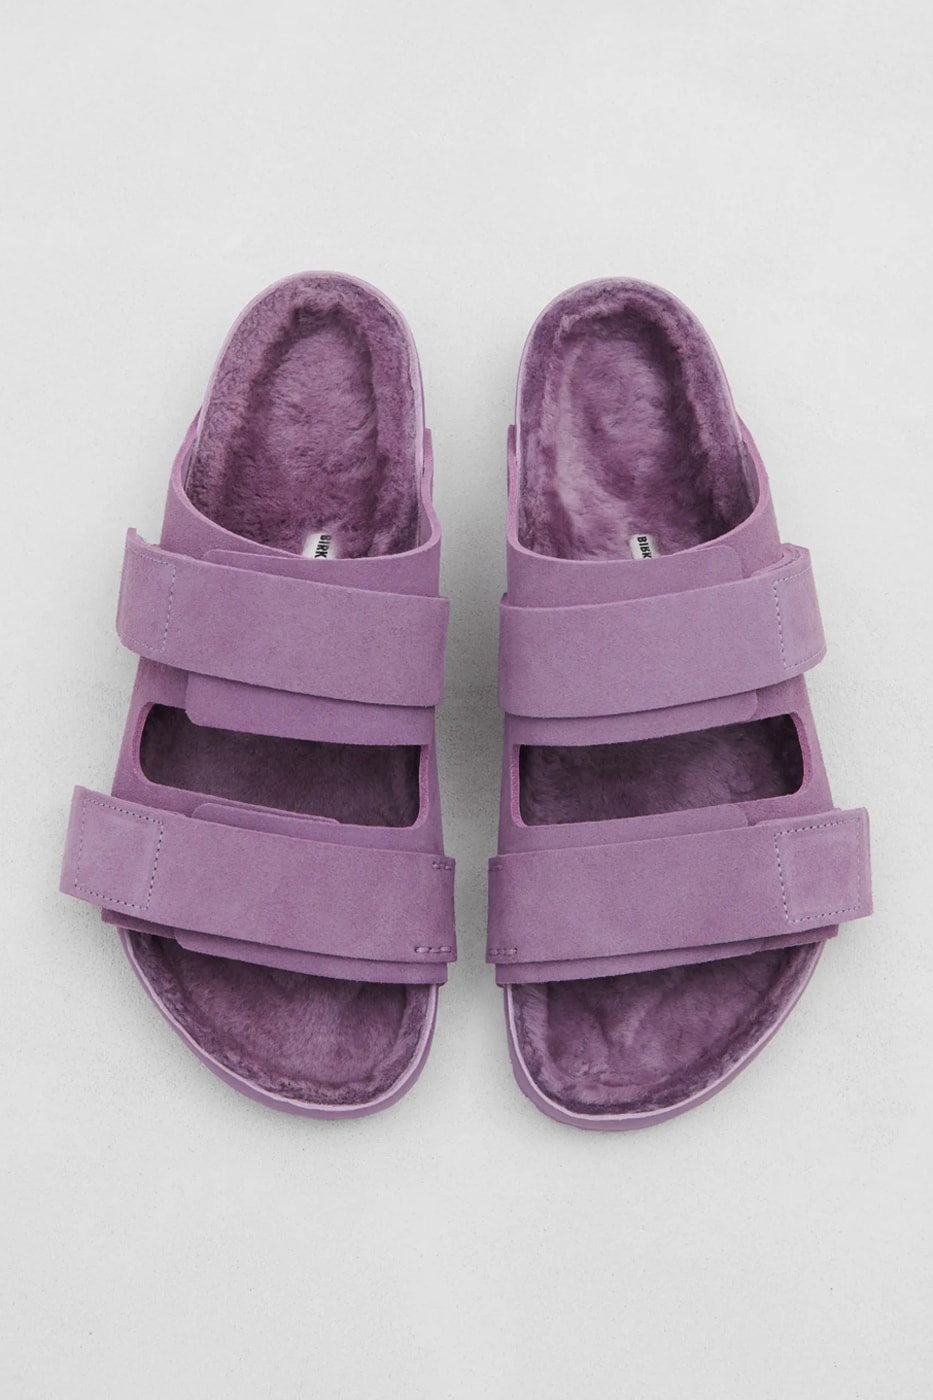 Birkenstock and Tekla Come Together for a Limited Edition Collection of Footwear and Sleepwear tekla fabrics sandals slippers collaboration sherpa stripe pyjamas mules boston uji nagoya 